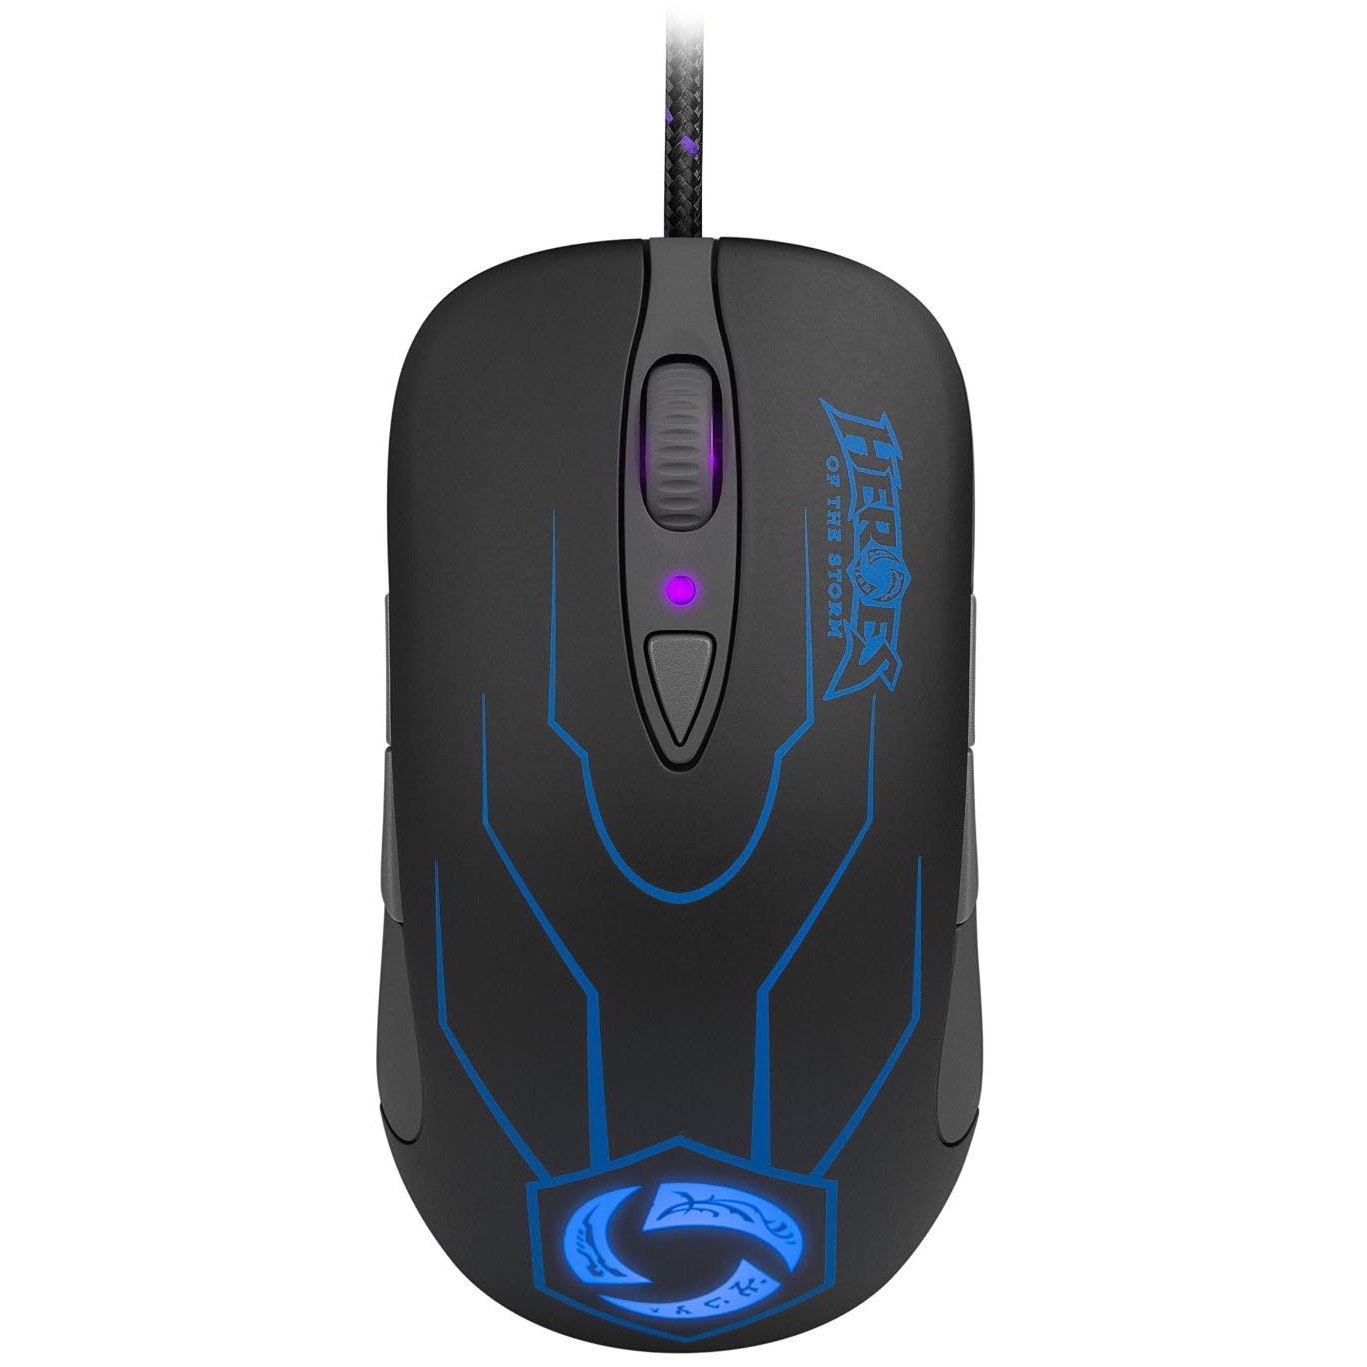 SteelSeries Heroes of the Storm Gaming Mouse موس استیل سریز گیمینگ Gaming